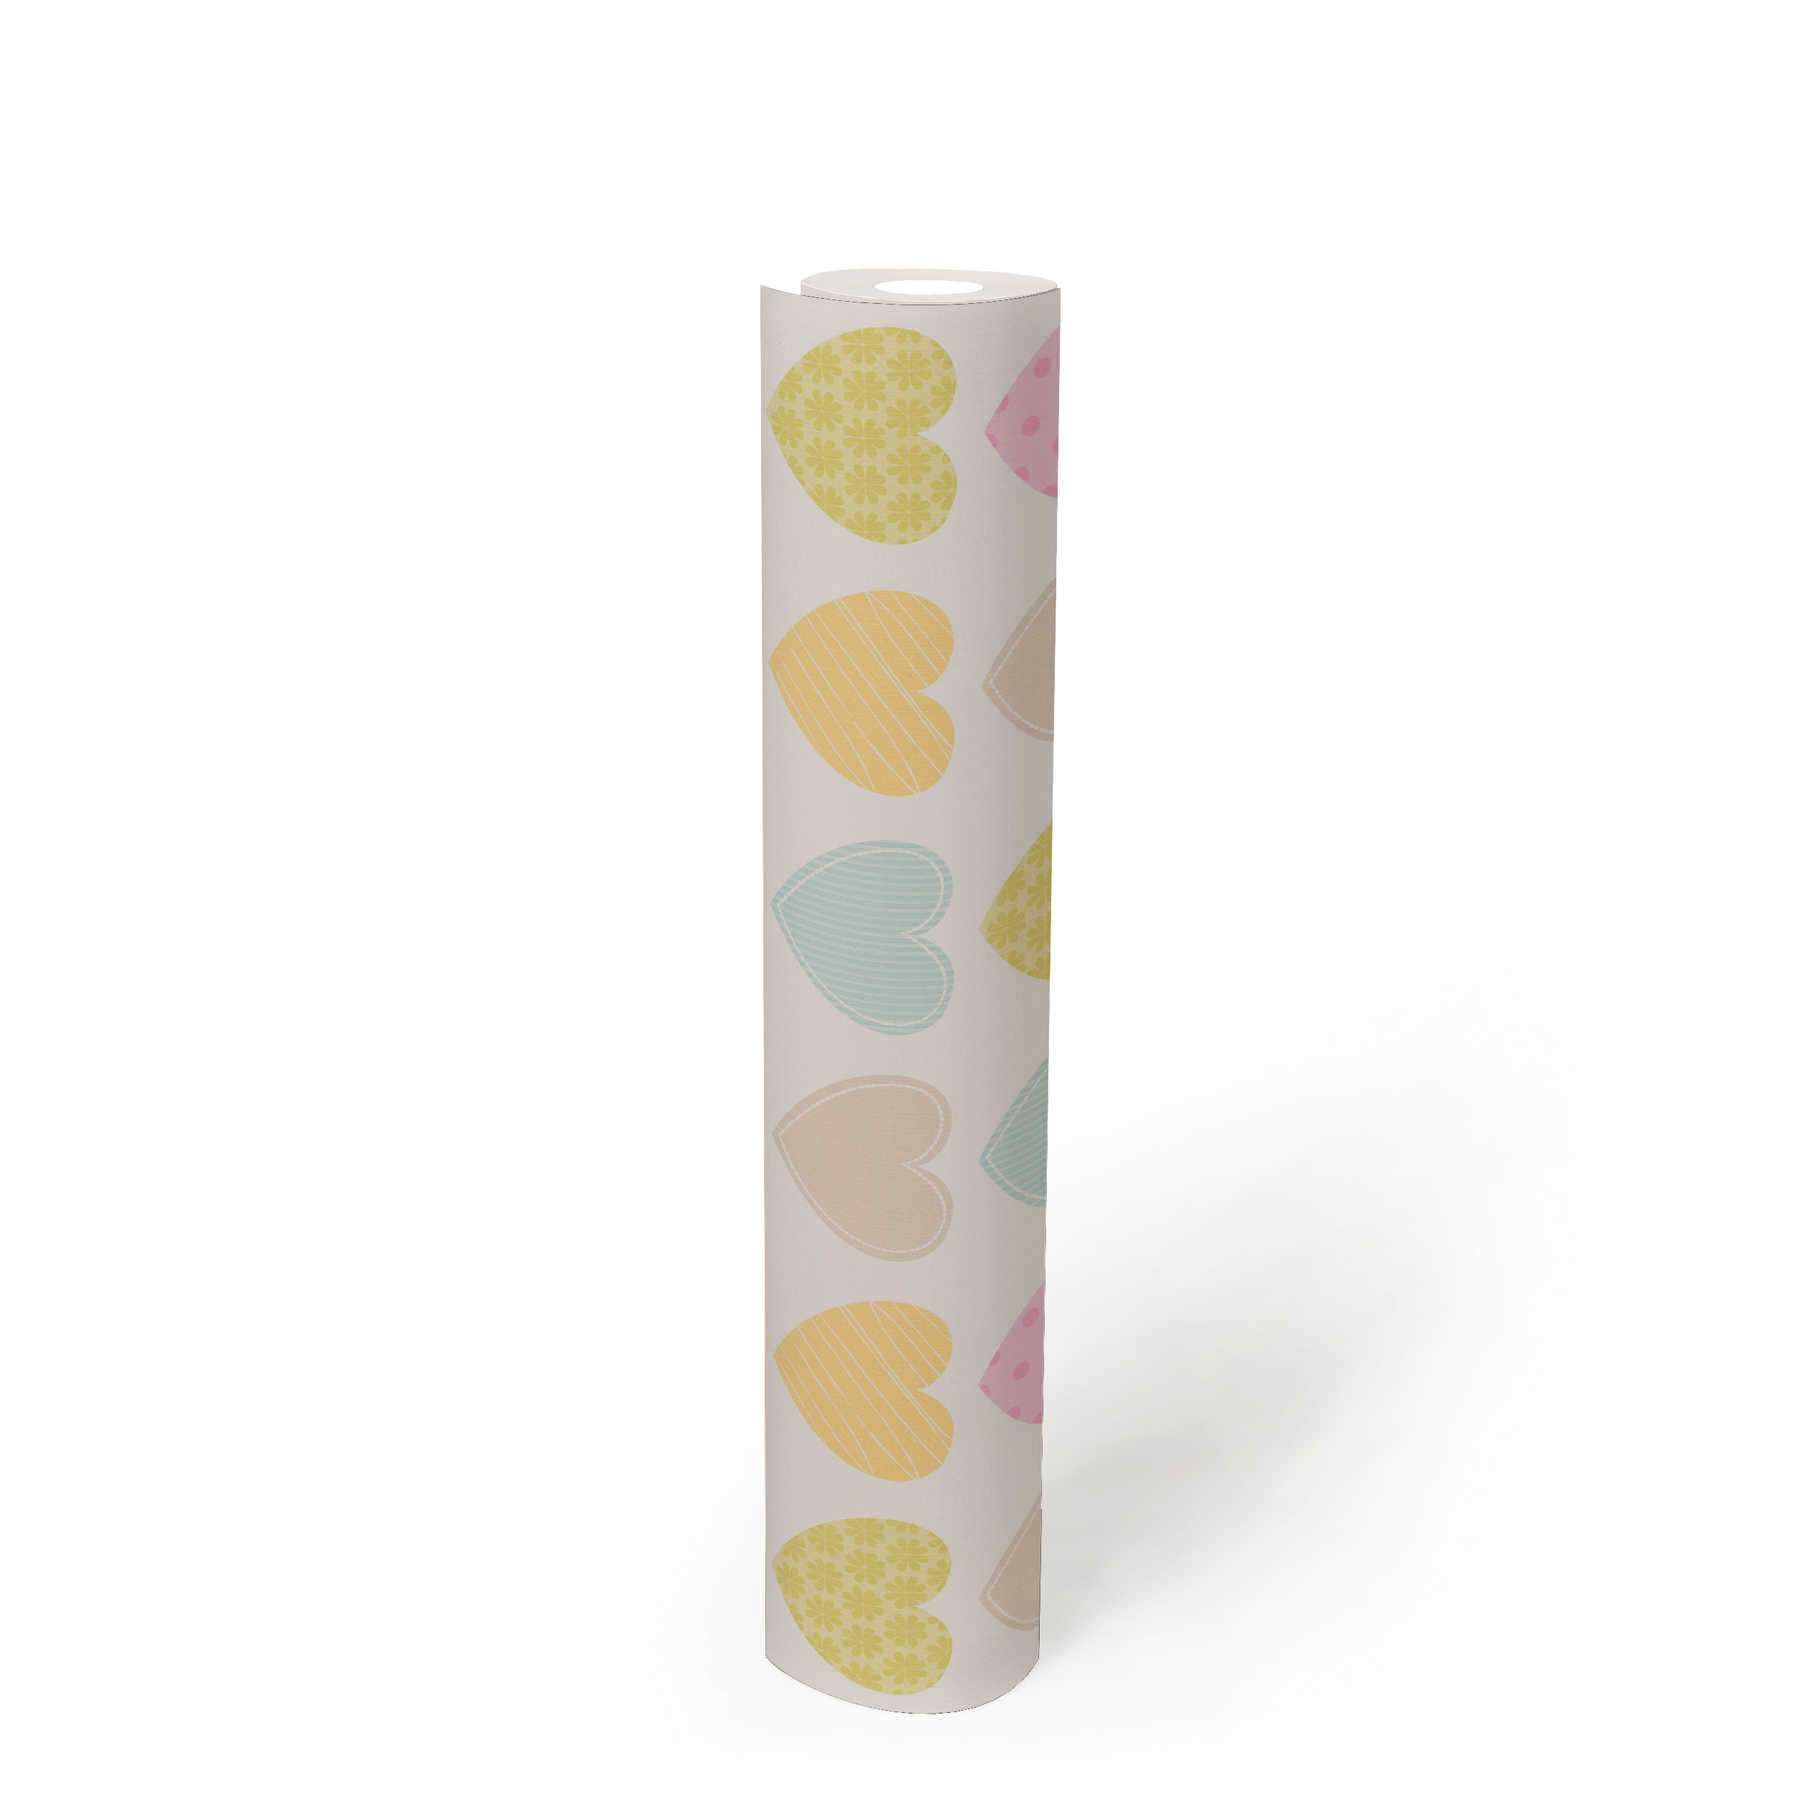             Pastel wallpaper with hearts for Nursery - colourful, white
        